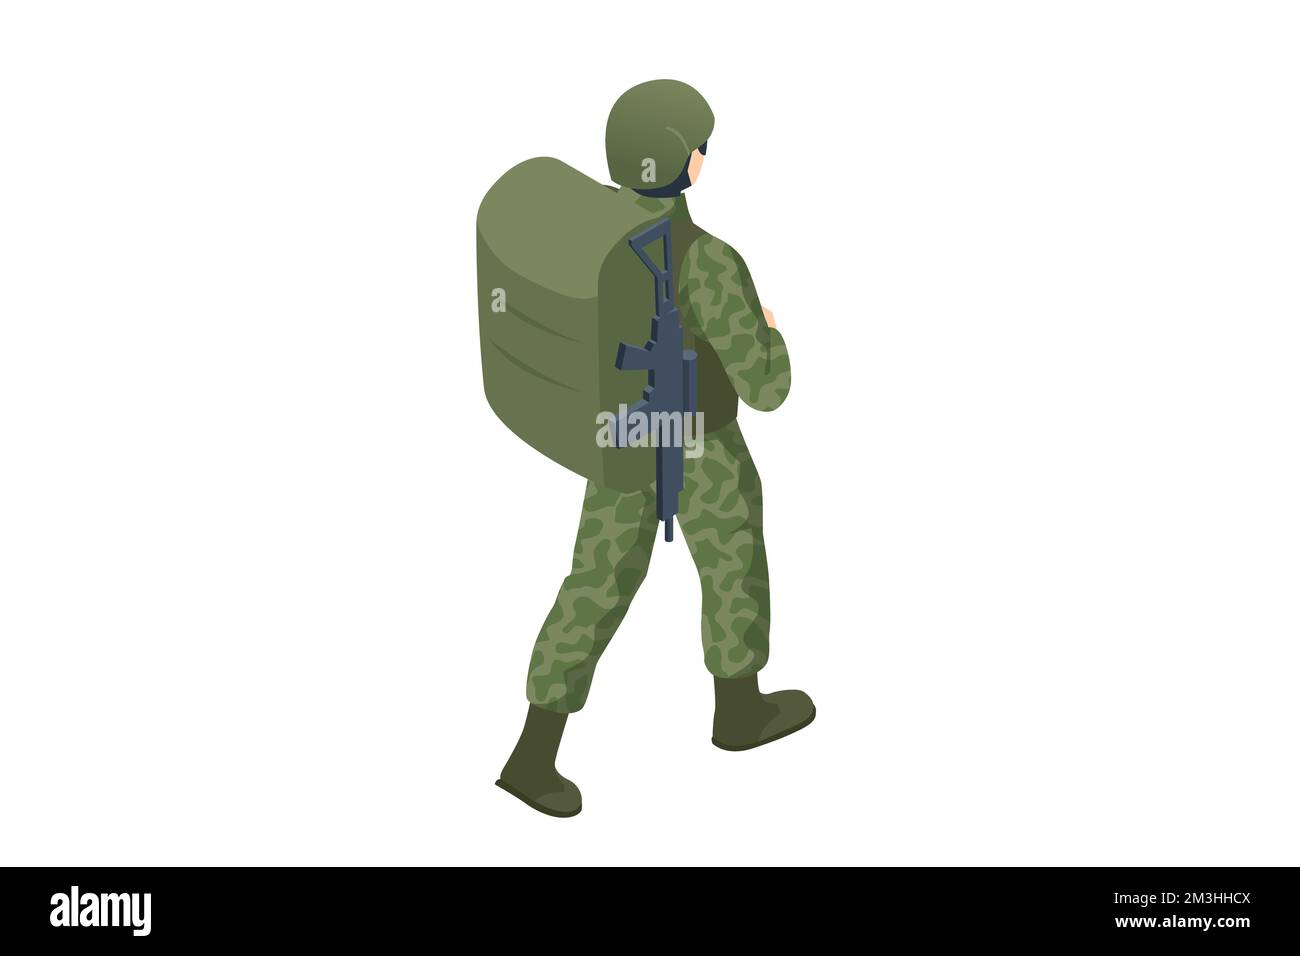 Isometric Military backpack war, hiking, army, camouflage equipment. Army Soldier in Protective Combat Uniform holding Assault Rifle with Military Stock Vector